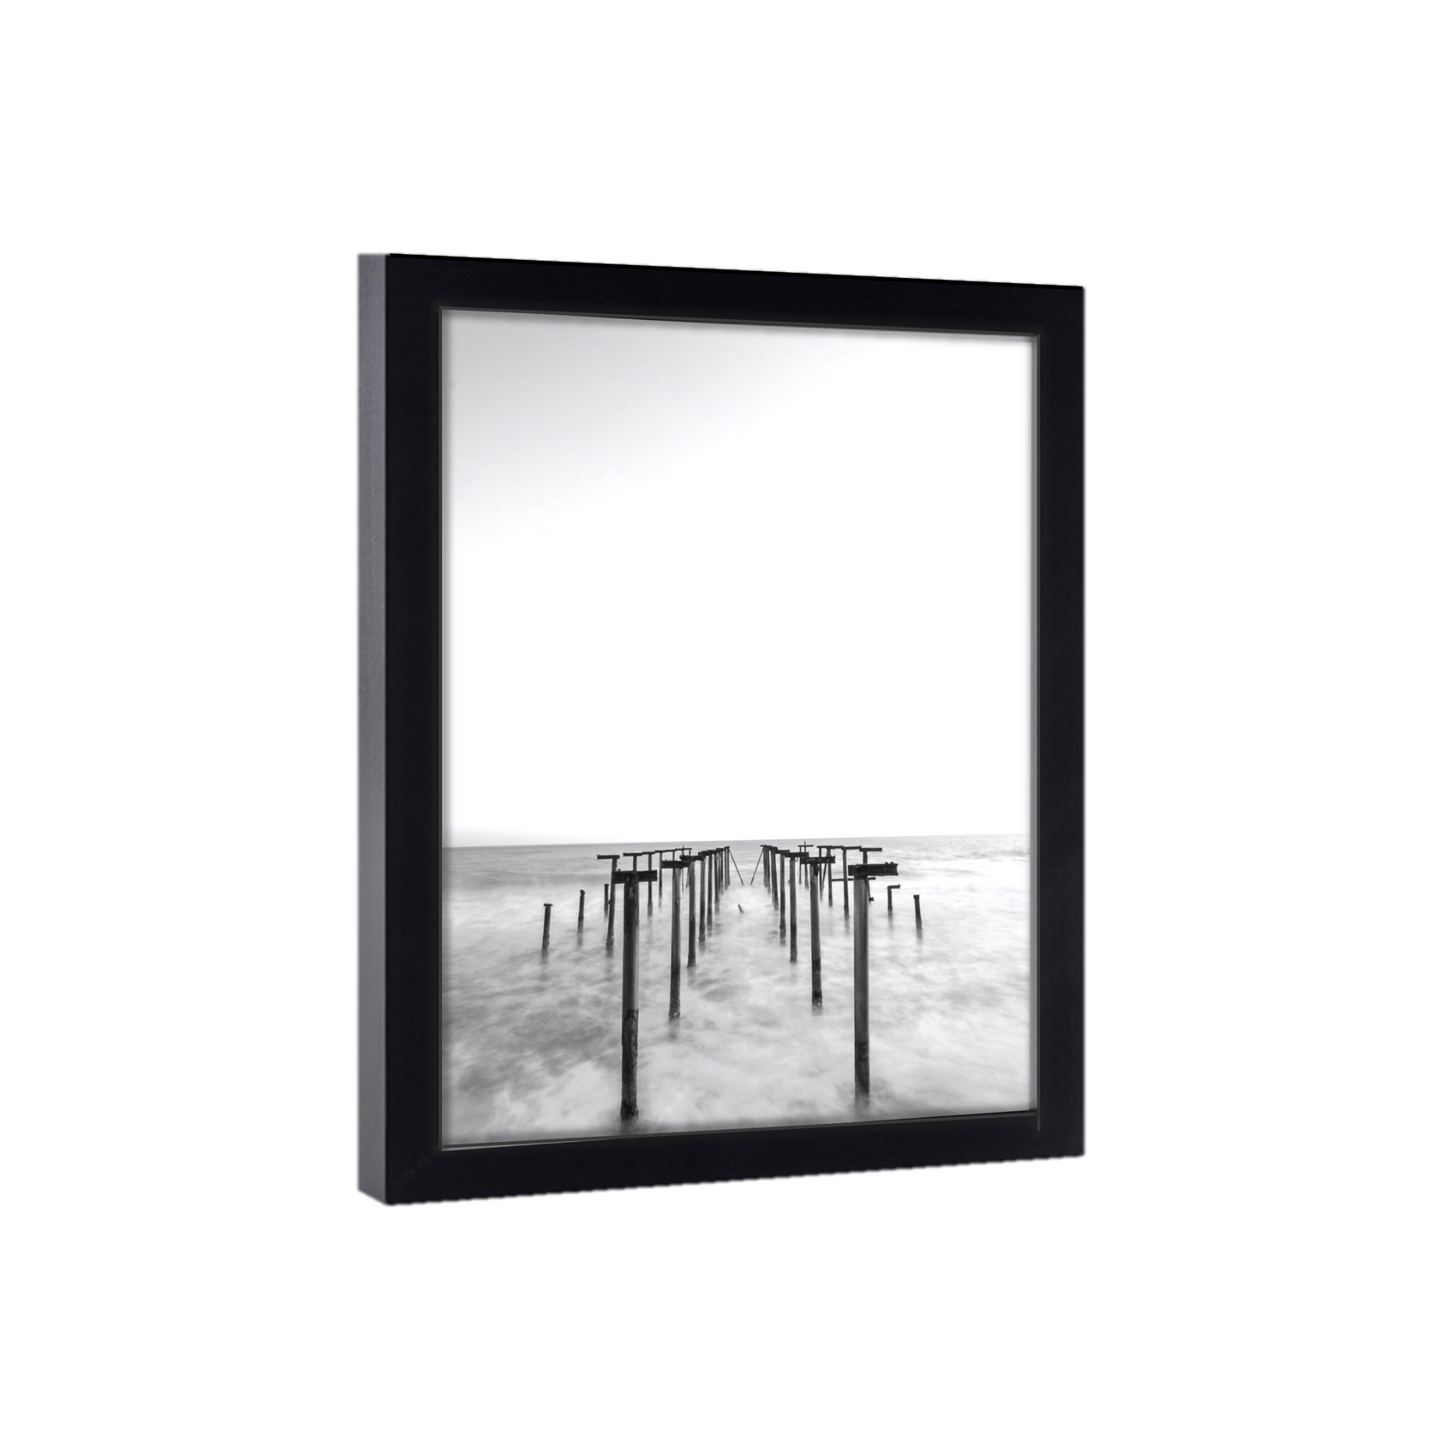 Gallery Wall 26x23 Picture Frame Black Wood 26x23  Poster Size